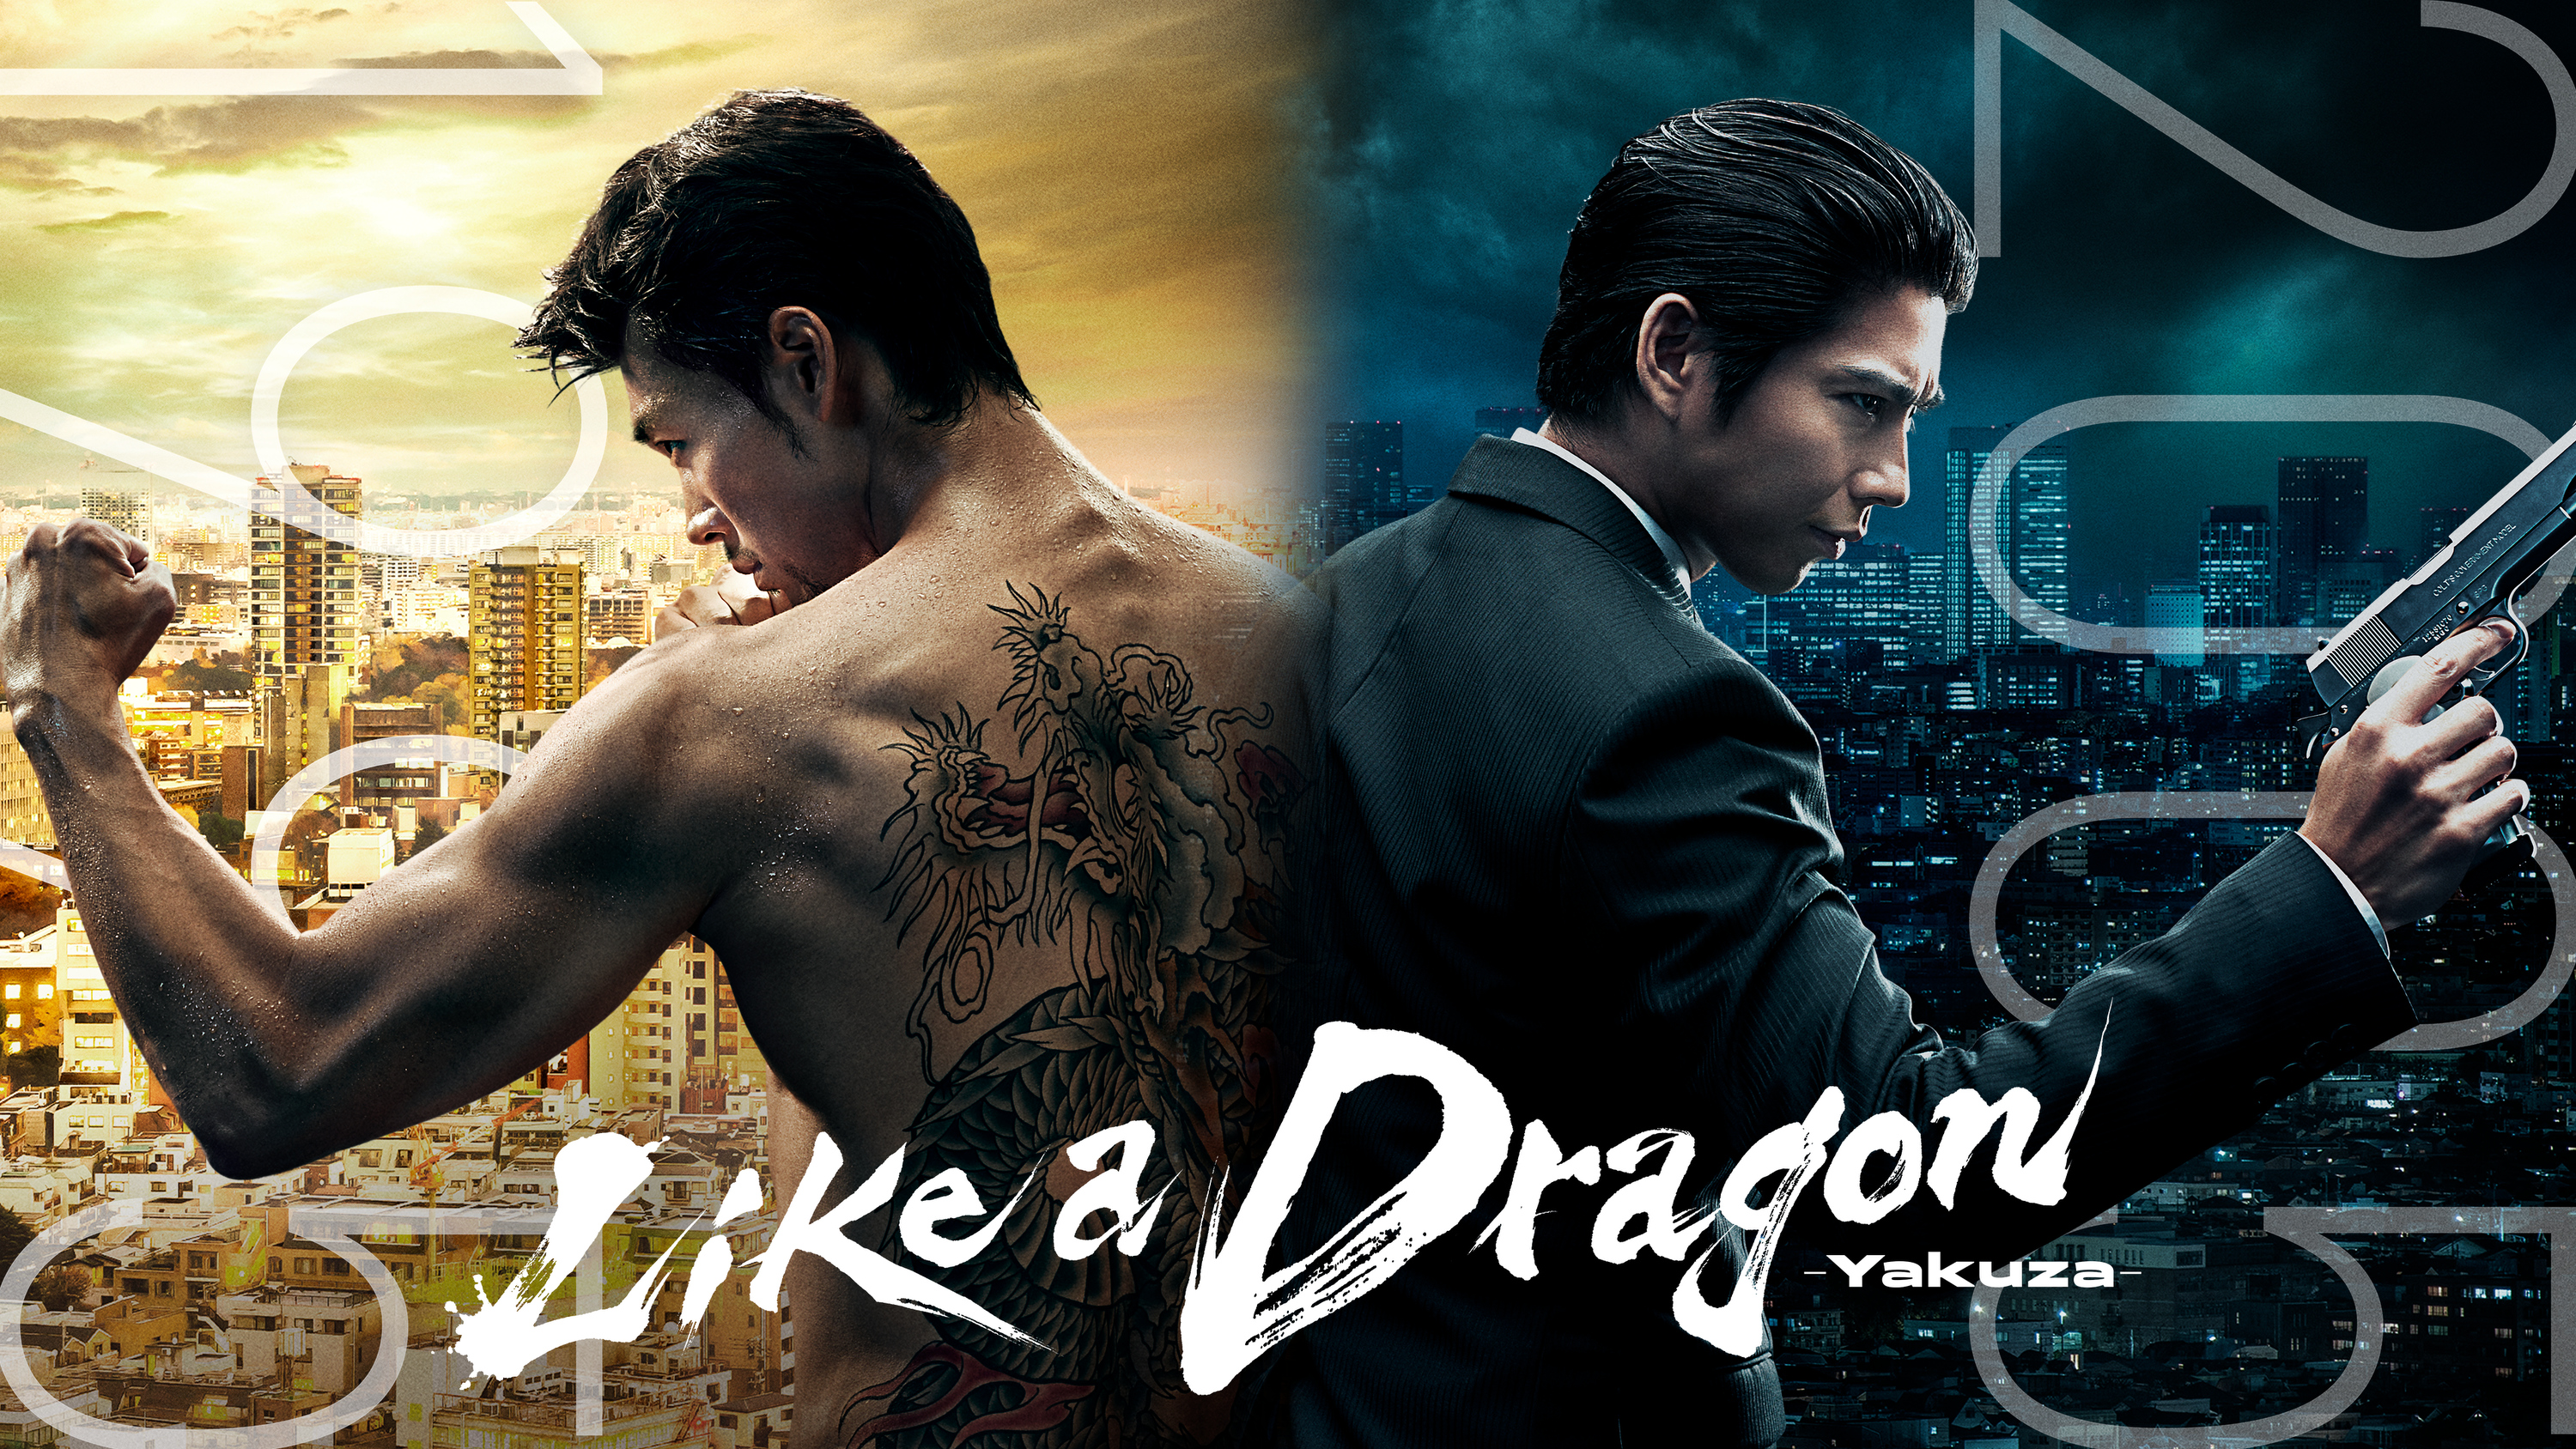 A poster image for Amazon Video’s live-action series adapting the Sega game series Like a Dragon features two men back to back, one in a suit and holding a gun, in front of a nighttime cityscape, the other shirtless and in a martial arts pose, in front of a daytime cityscape